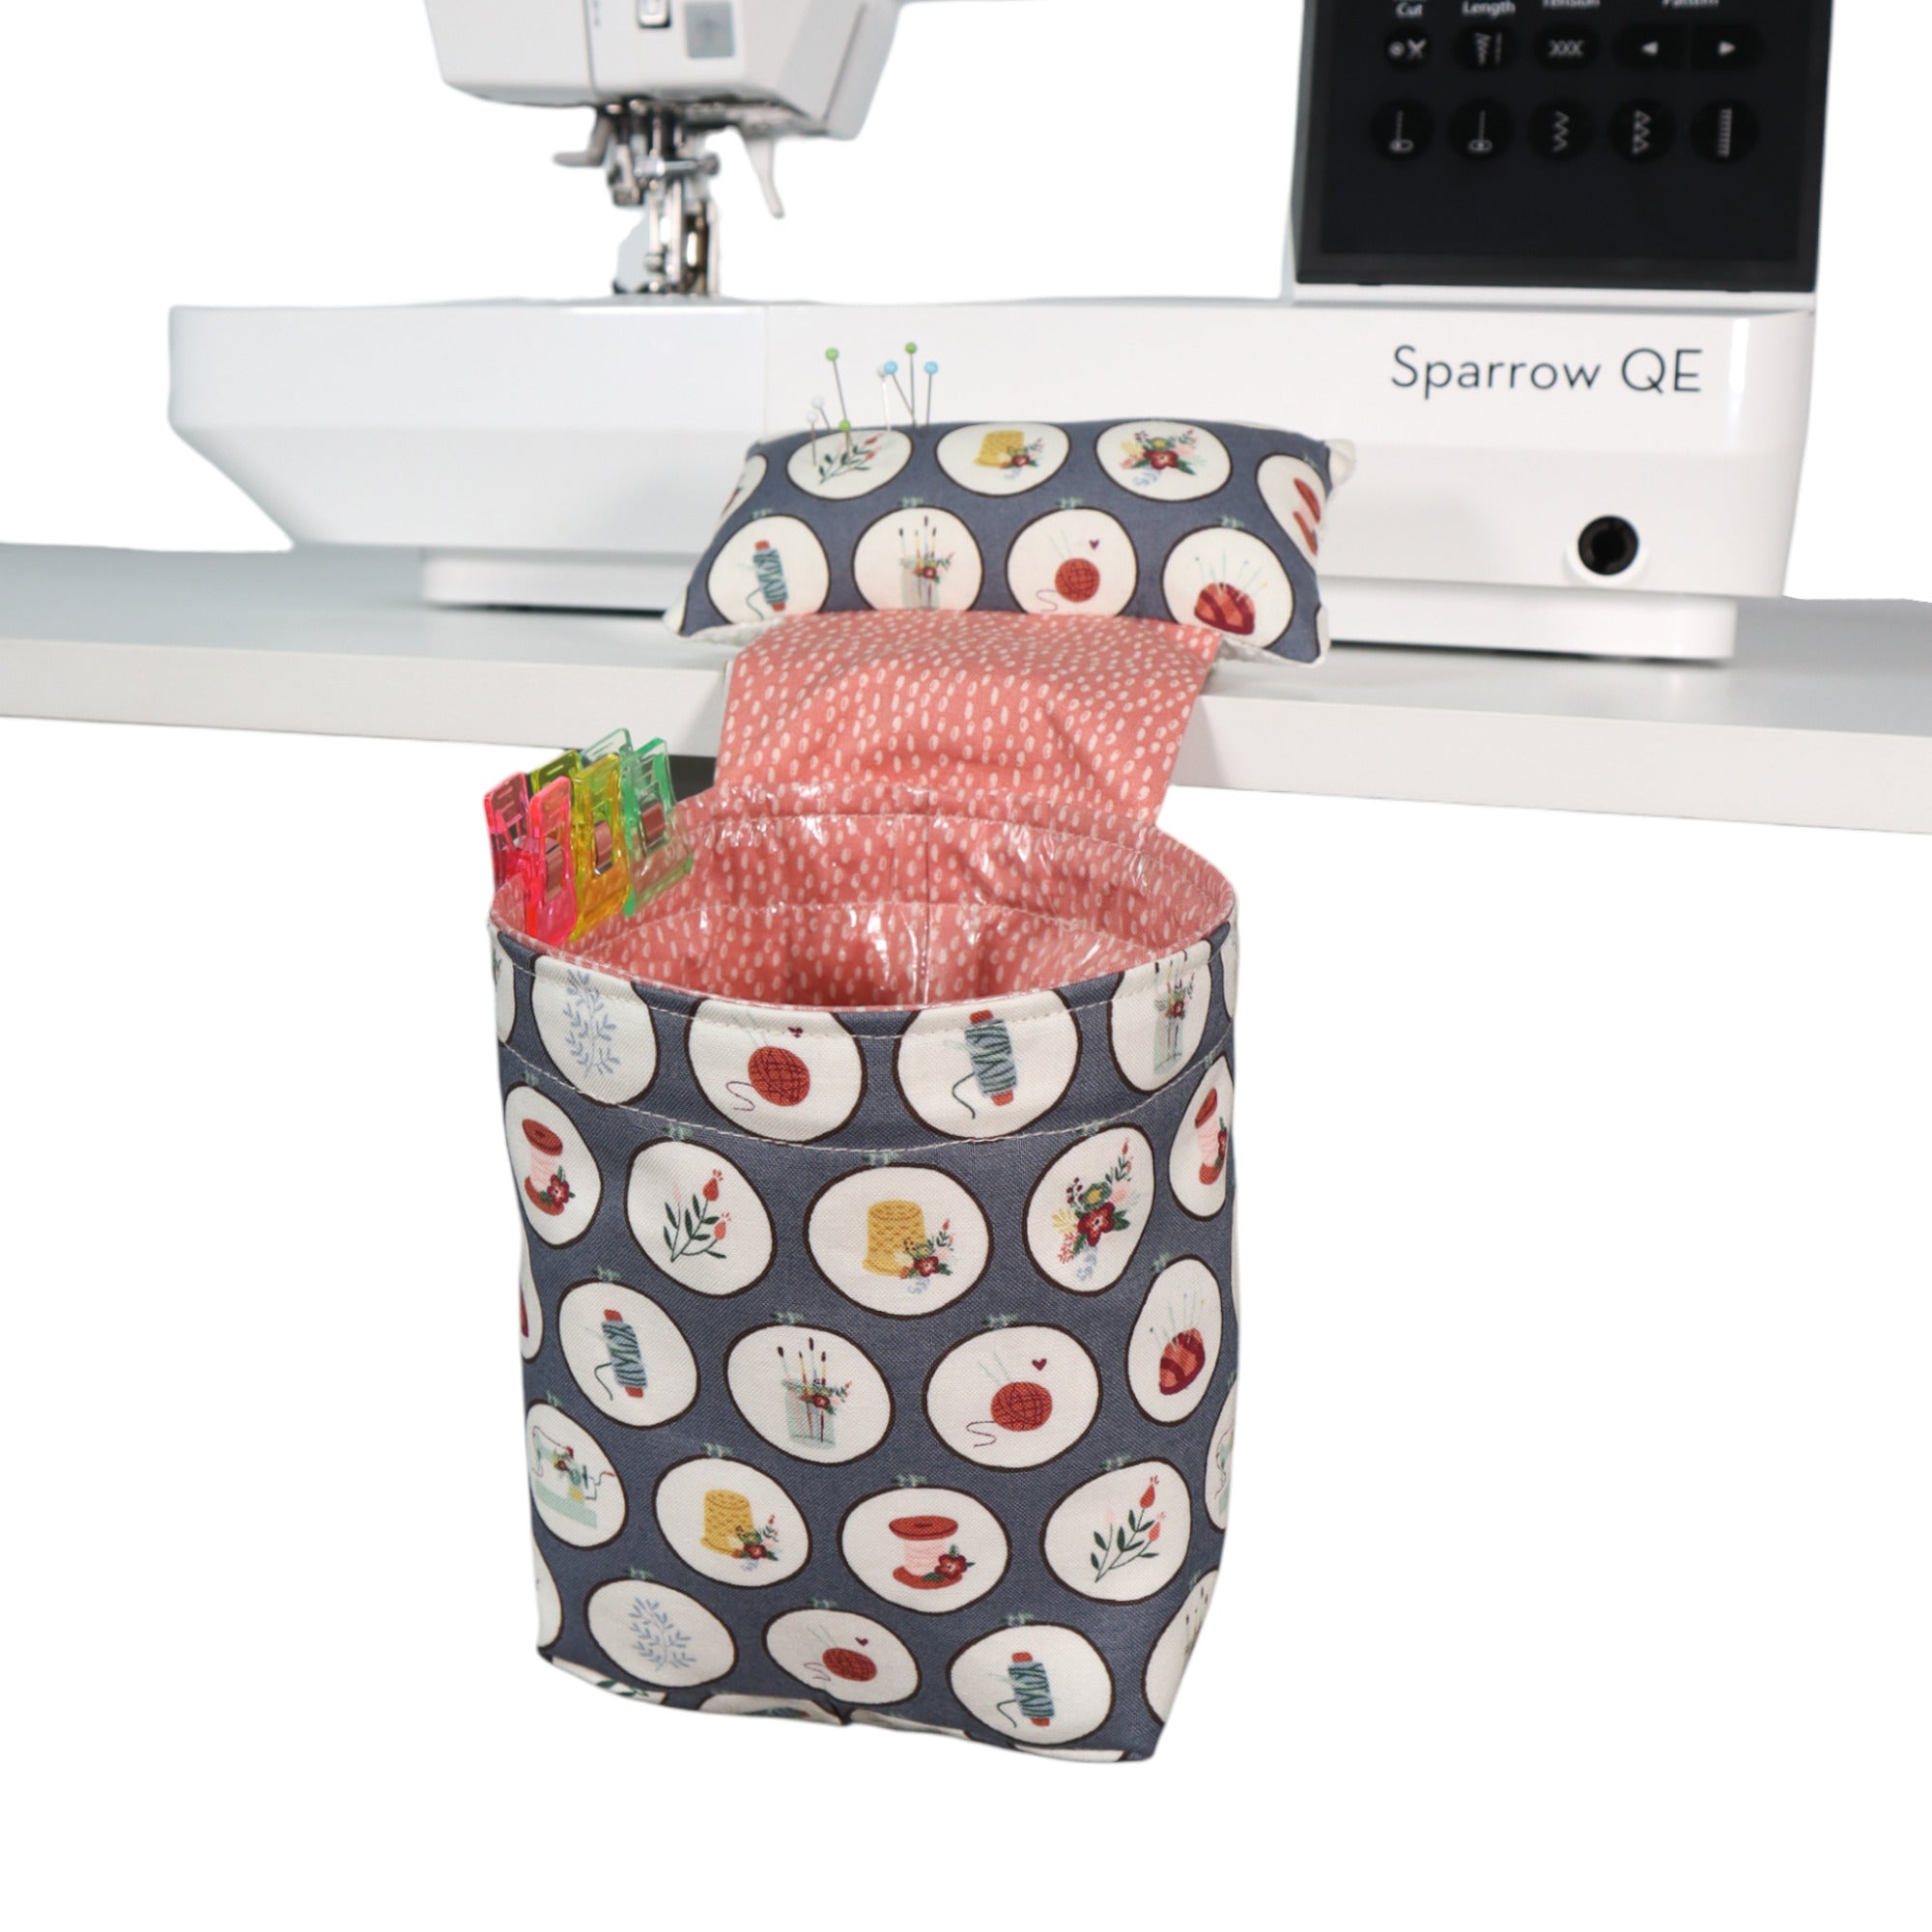 Sewing Machine Mat, Pin Cushion and Thread Catcher Sewing Kit - Sew Co –  Crosscut Sewing Co.